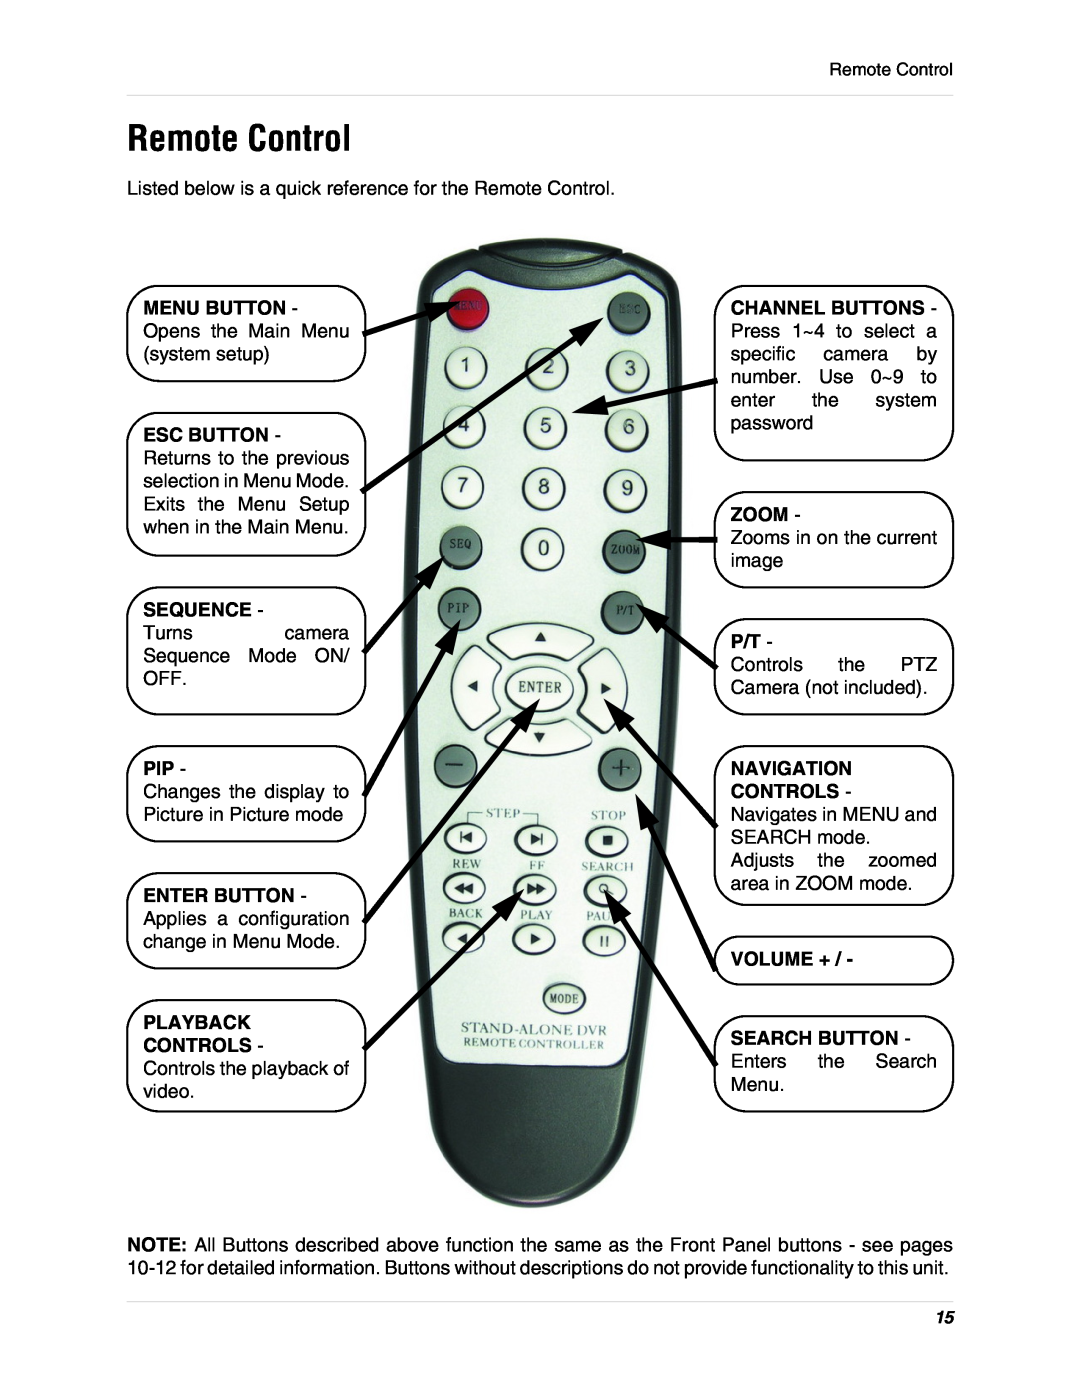 LOREX Technology L15D400 Remote Control, Sequence, Playback Controls, Zoom, Navigation, Volume + Search Button 